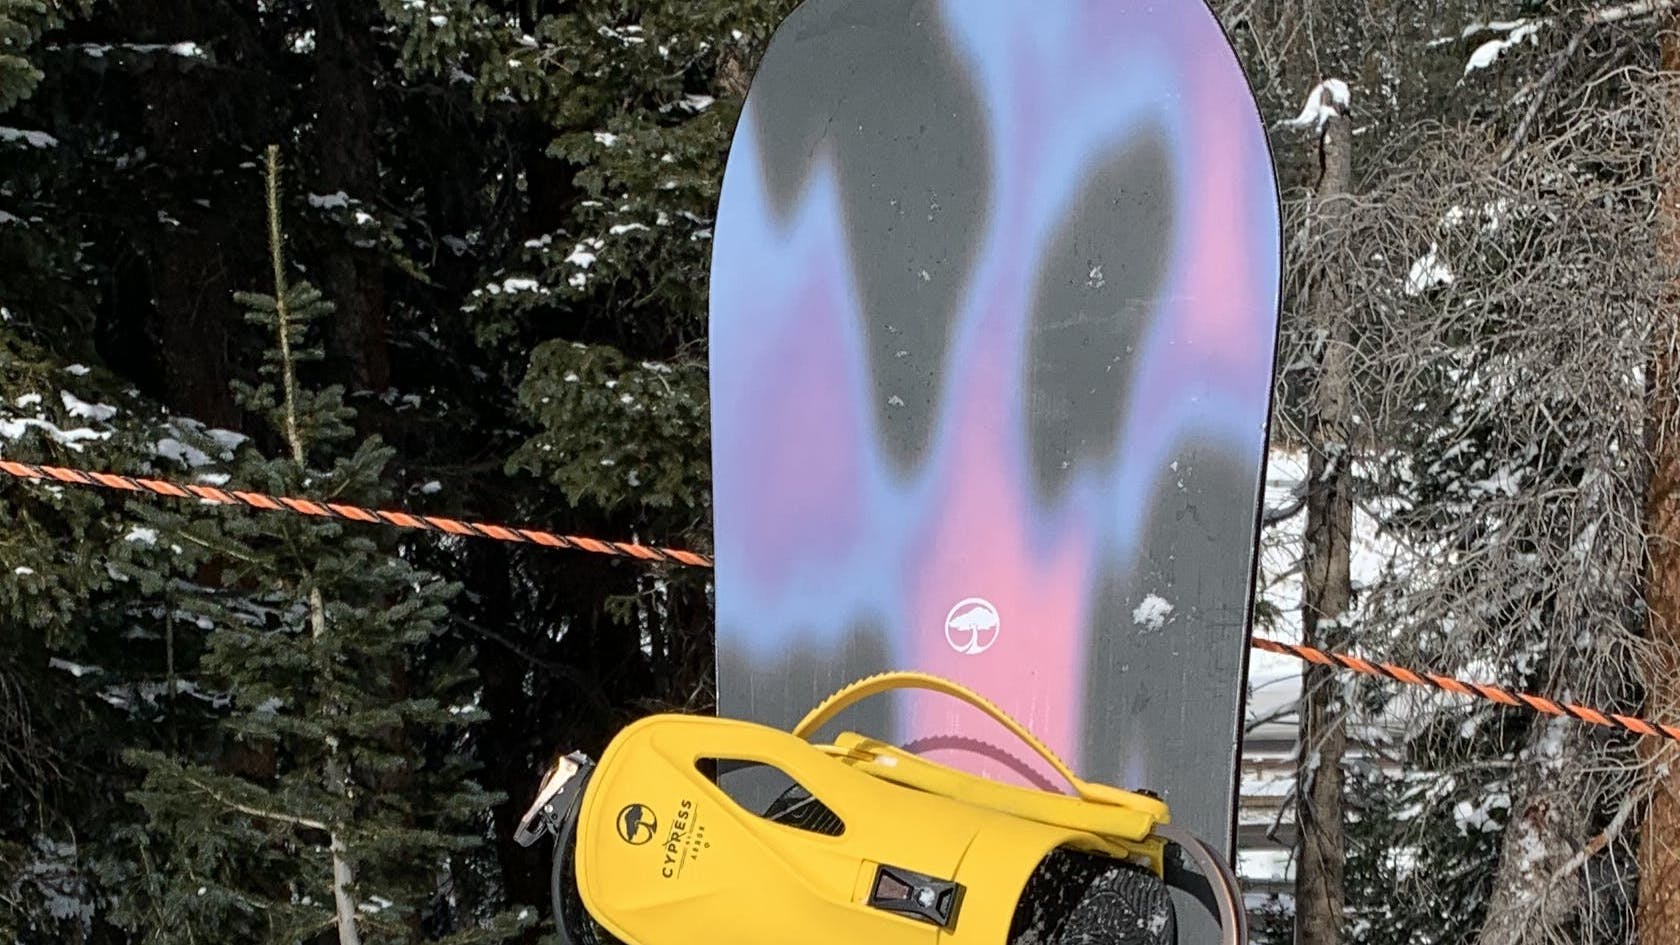 The Arbor Draft Camber Snowboard.